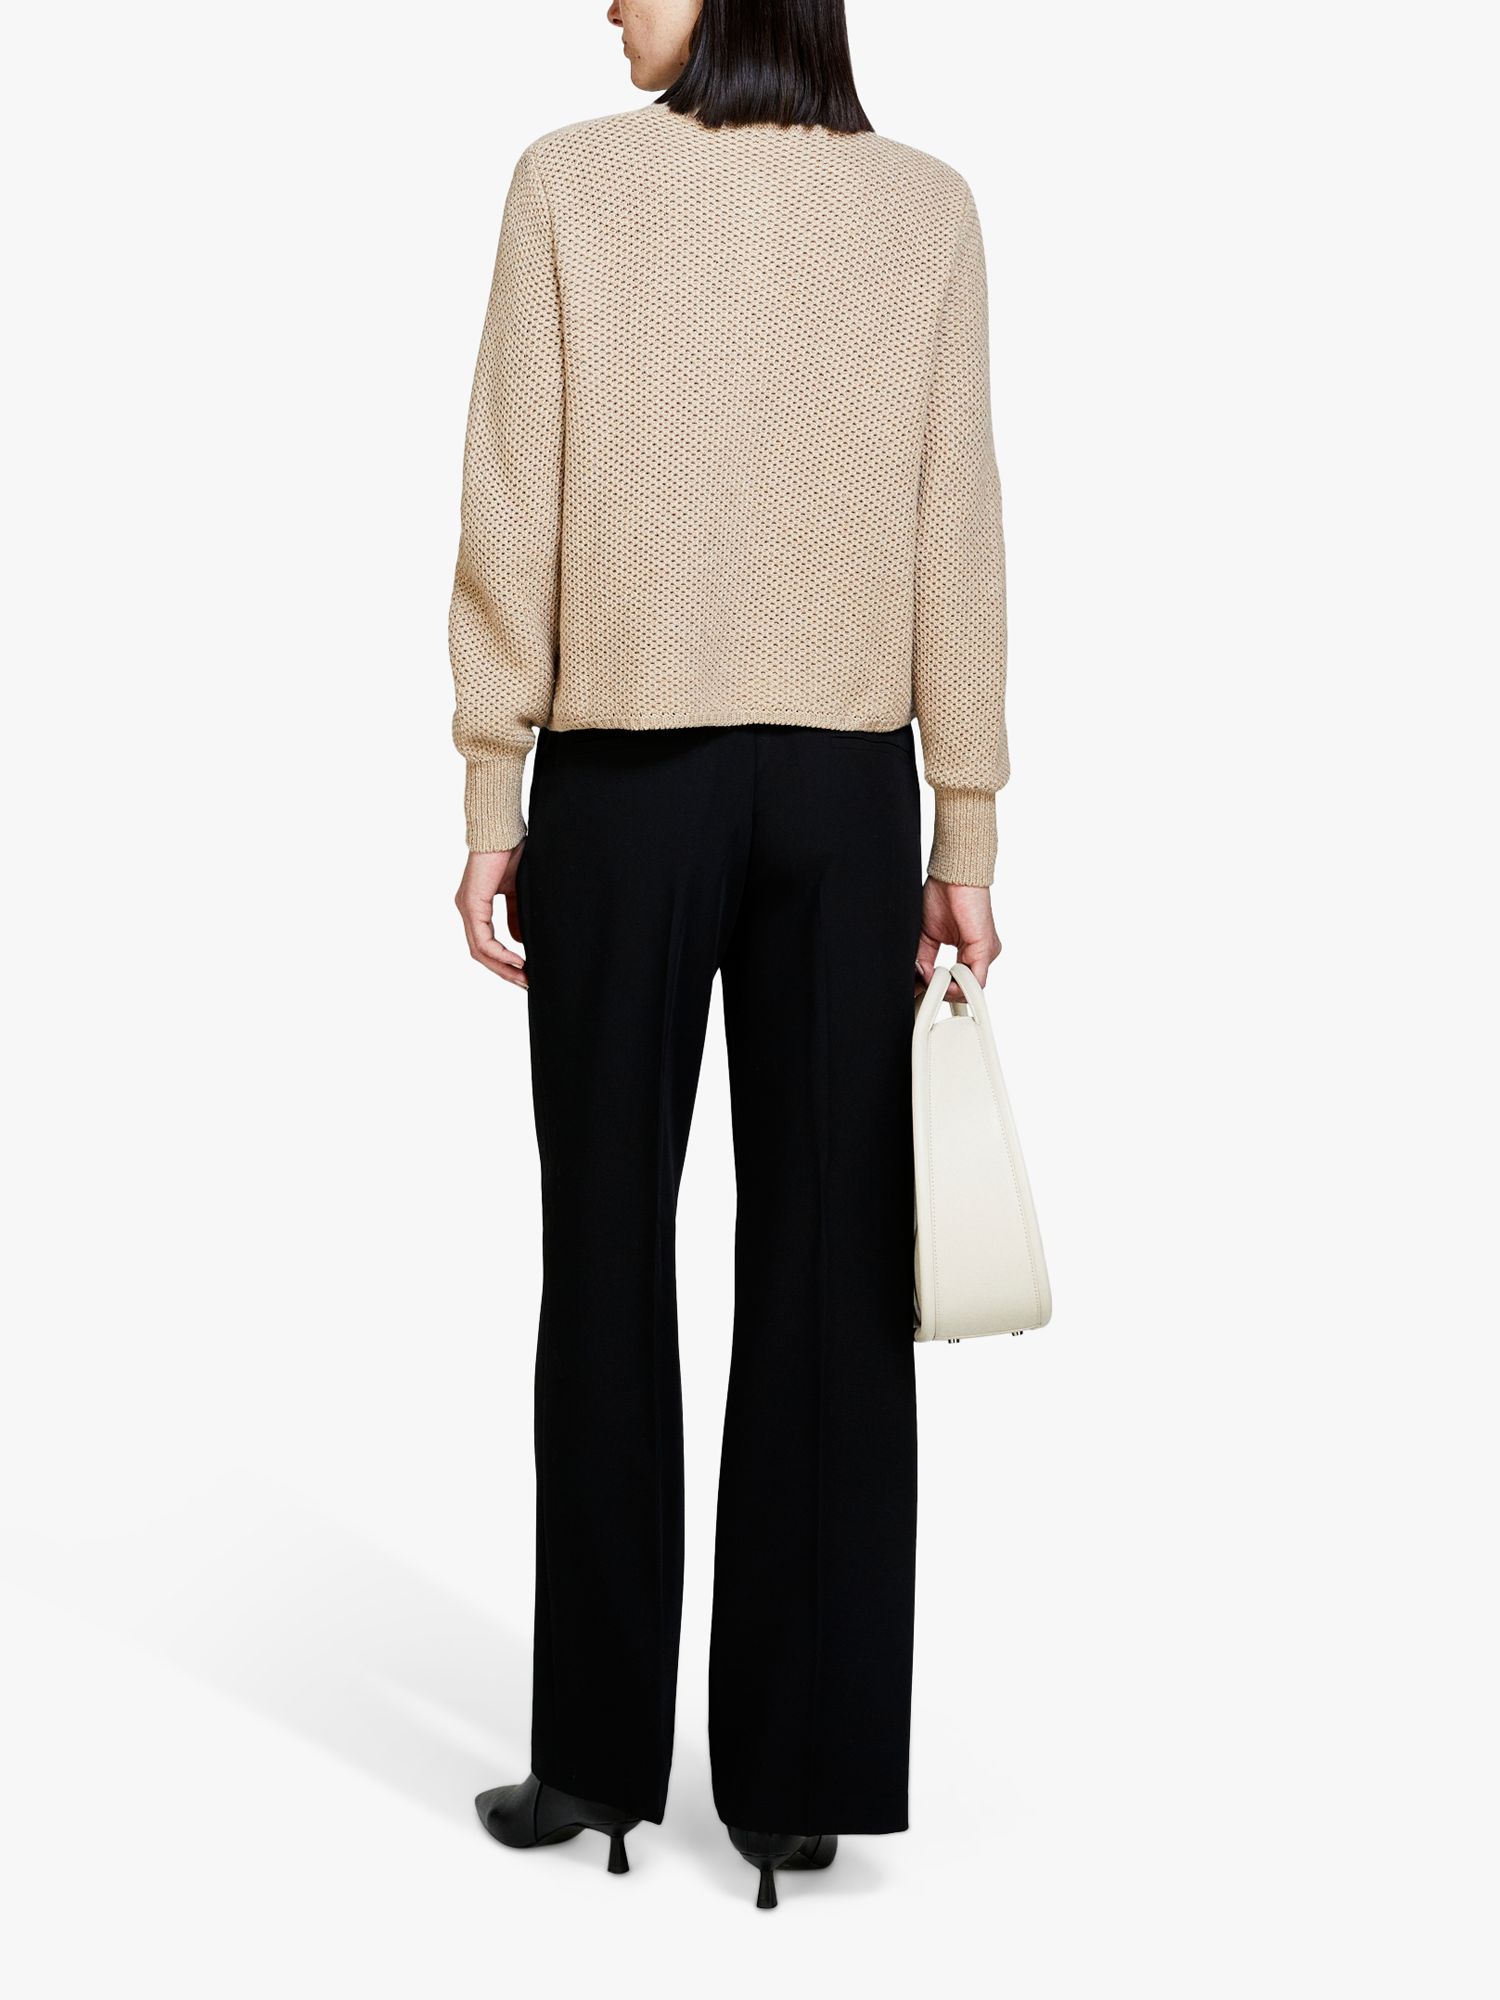 Buy Sisley Honey Comb Buttoned Cardigan Online at johnlewis.com